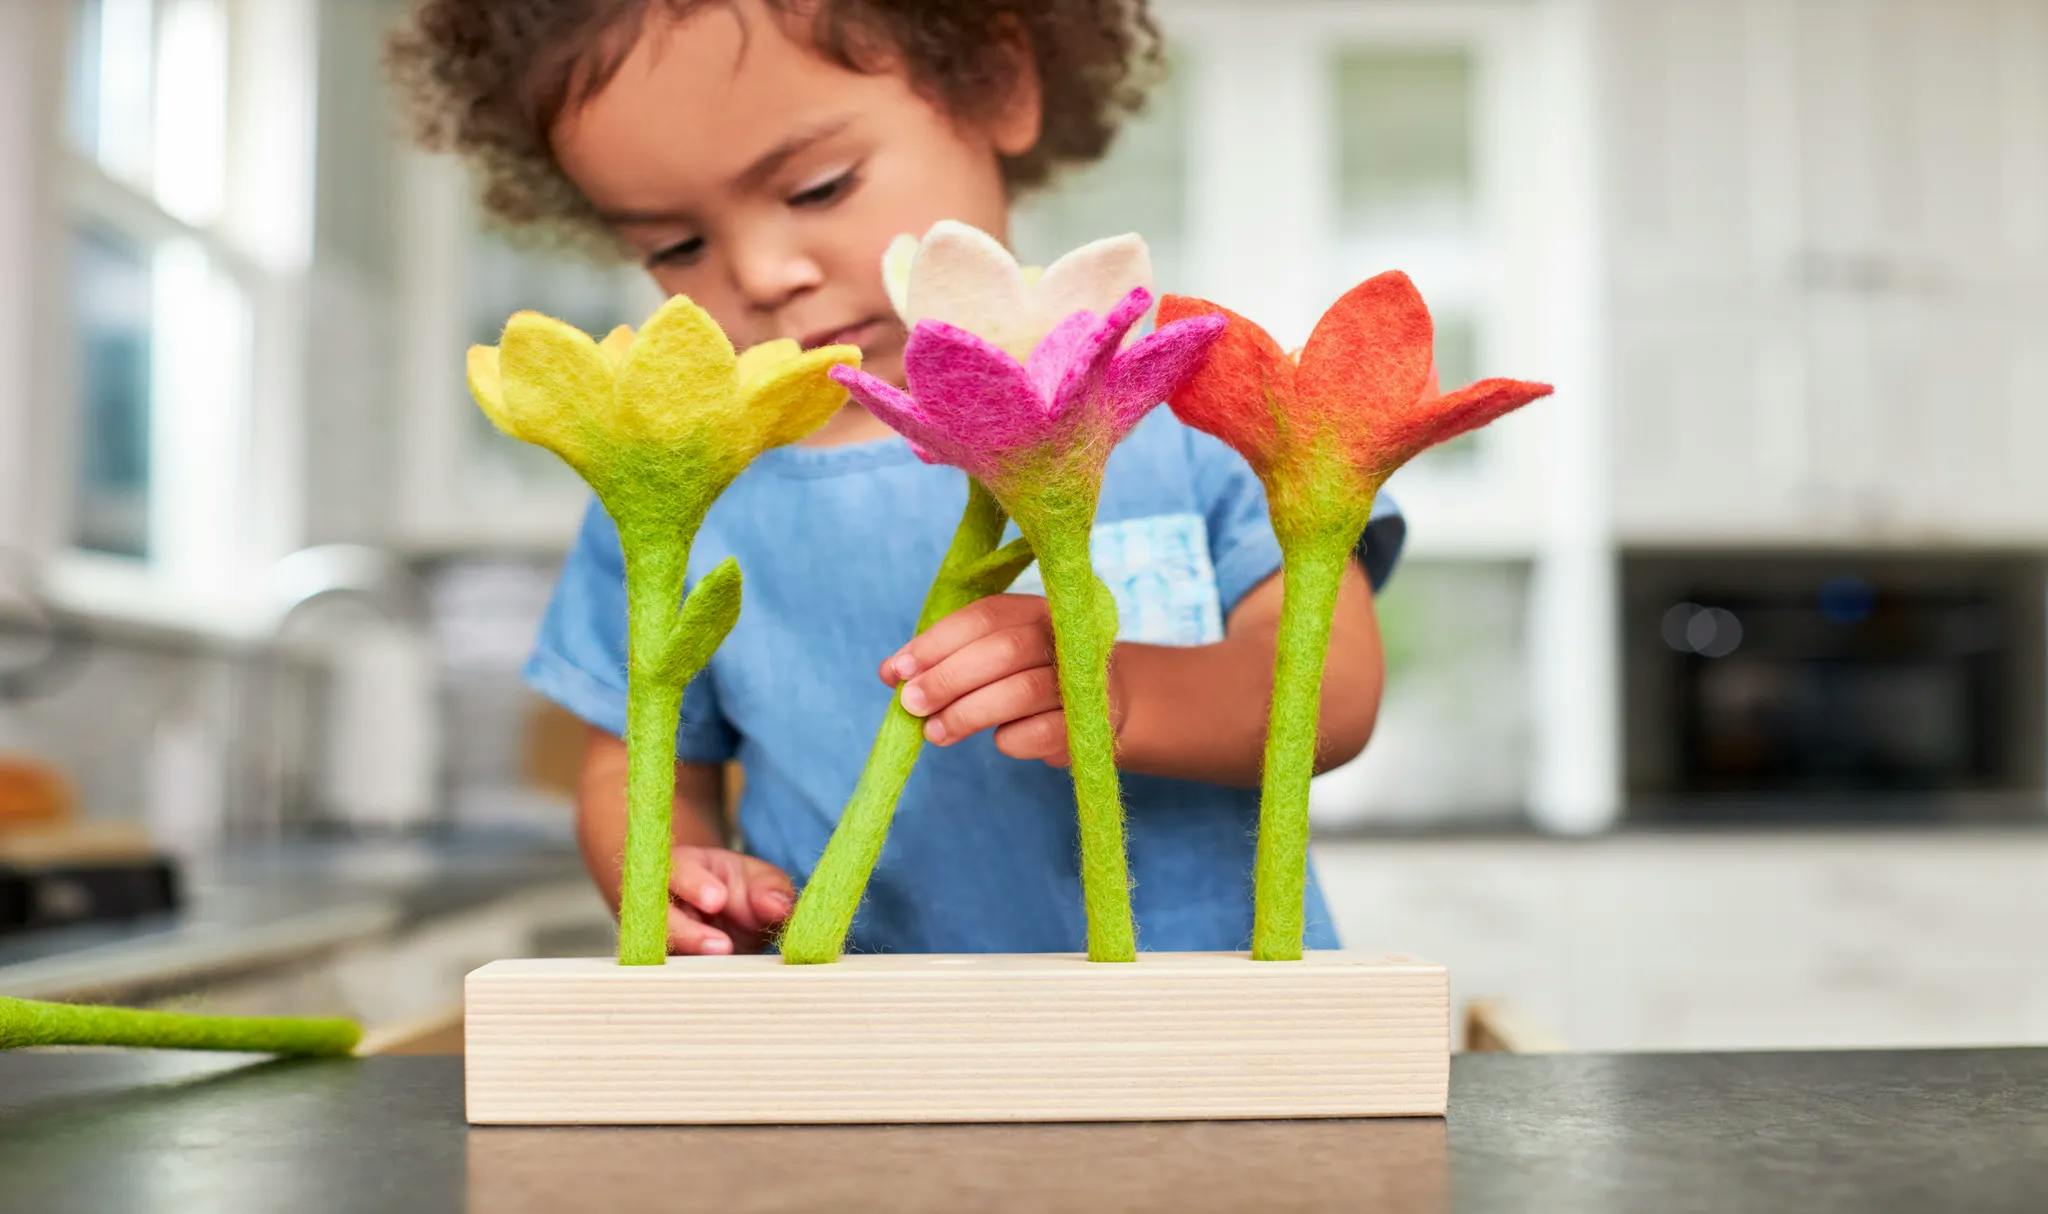 Child playing with the Felt Flowers in a Row from The Helper Play Kit